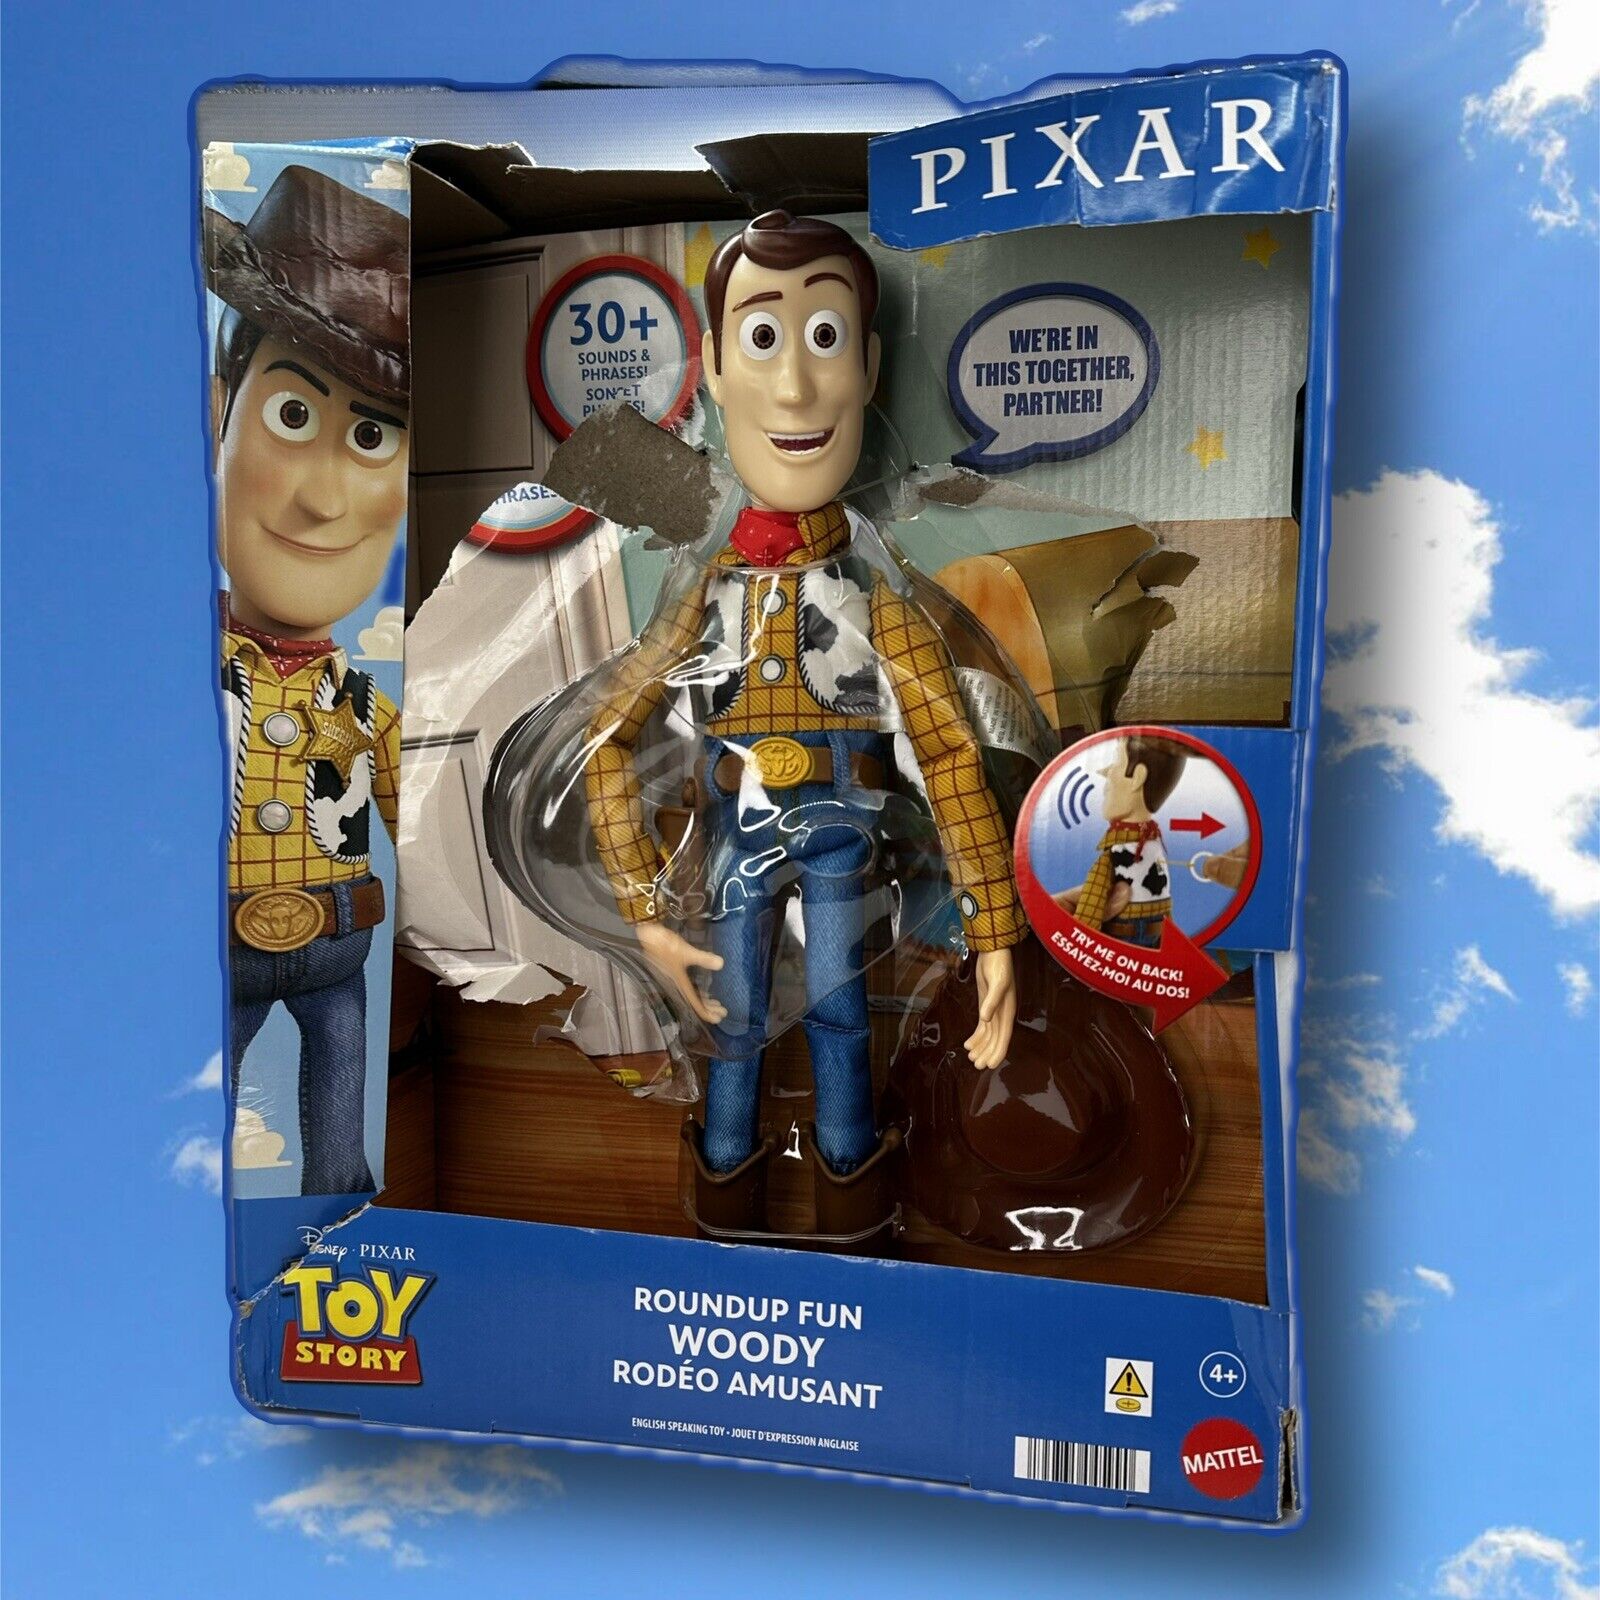 Disney Pixar Toy Story Roundup Fun Woody Action Figure - New - Damaged Package